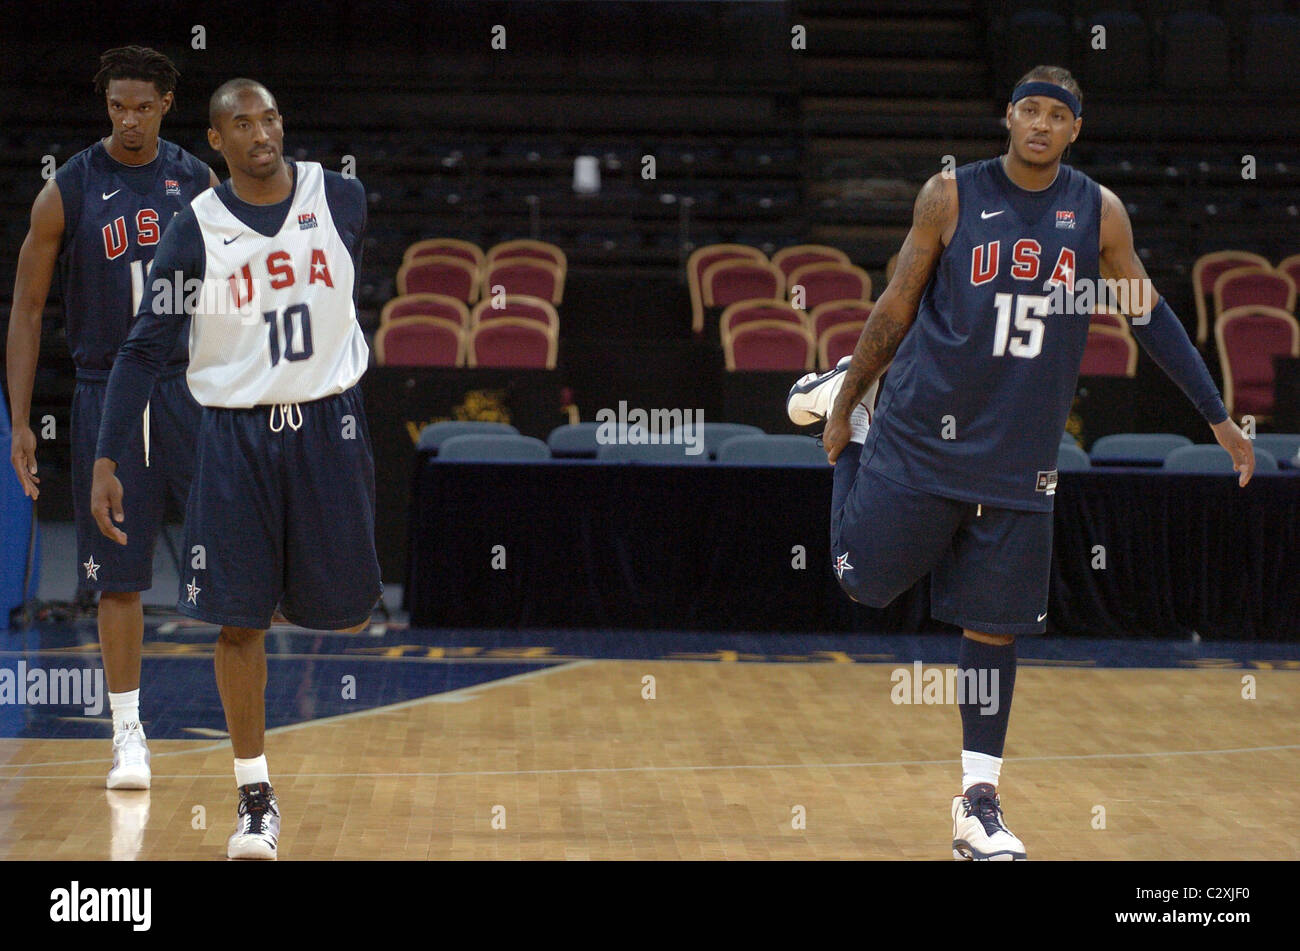 Players Carmelo Anthonyand Kobe Bryant The 2008 Usa Basketball Men S National Team Practice During A Training Session For Stock Photo Alamy